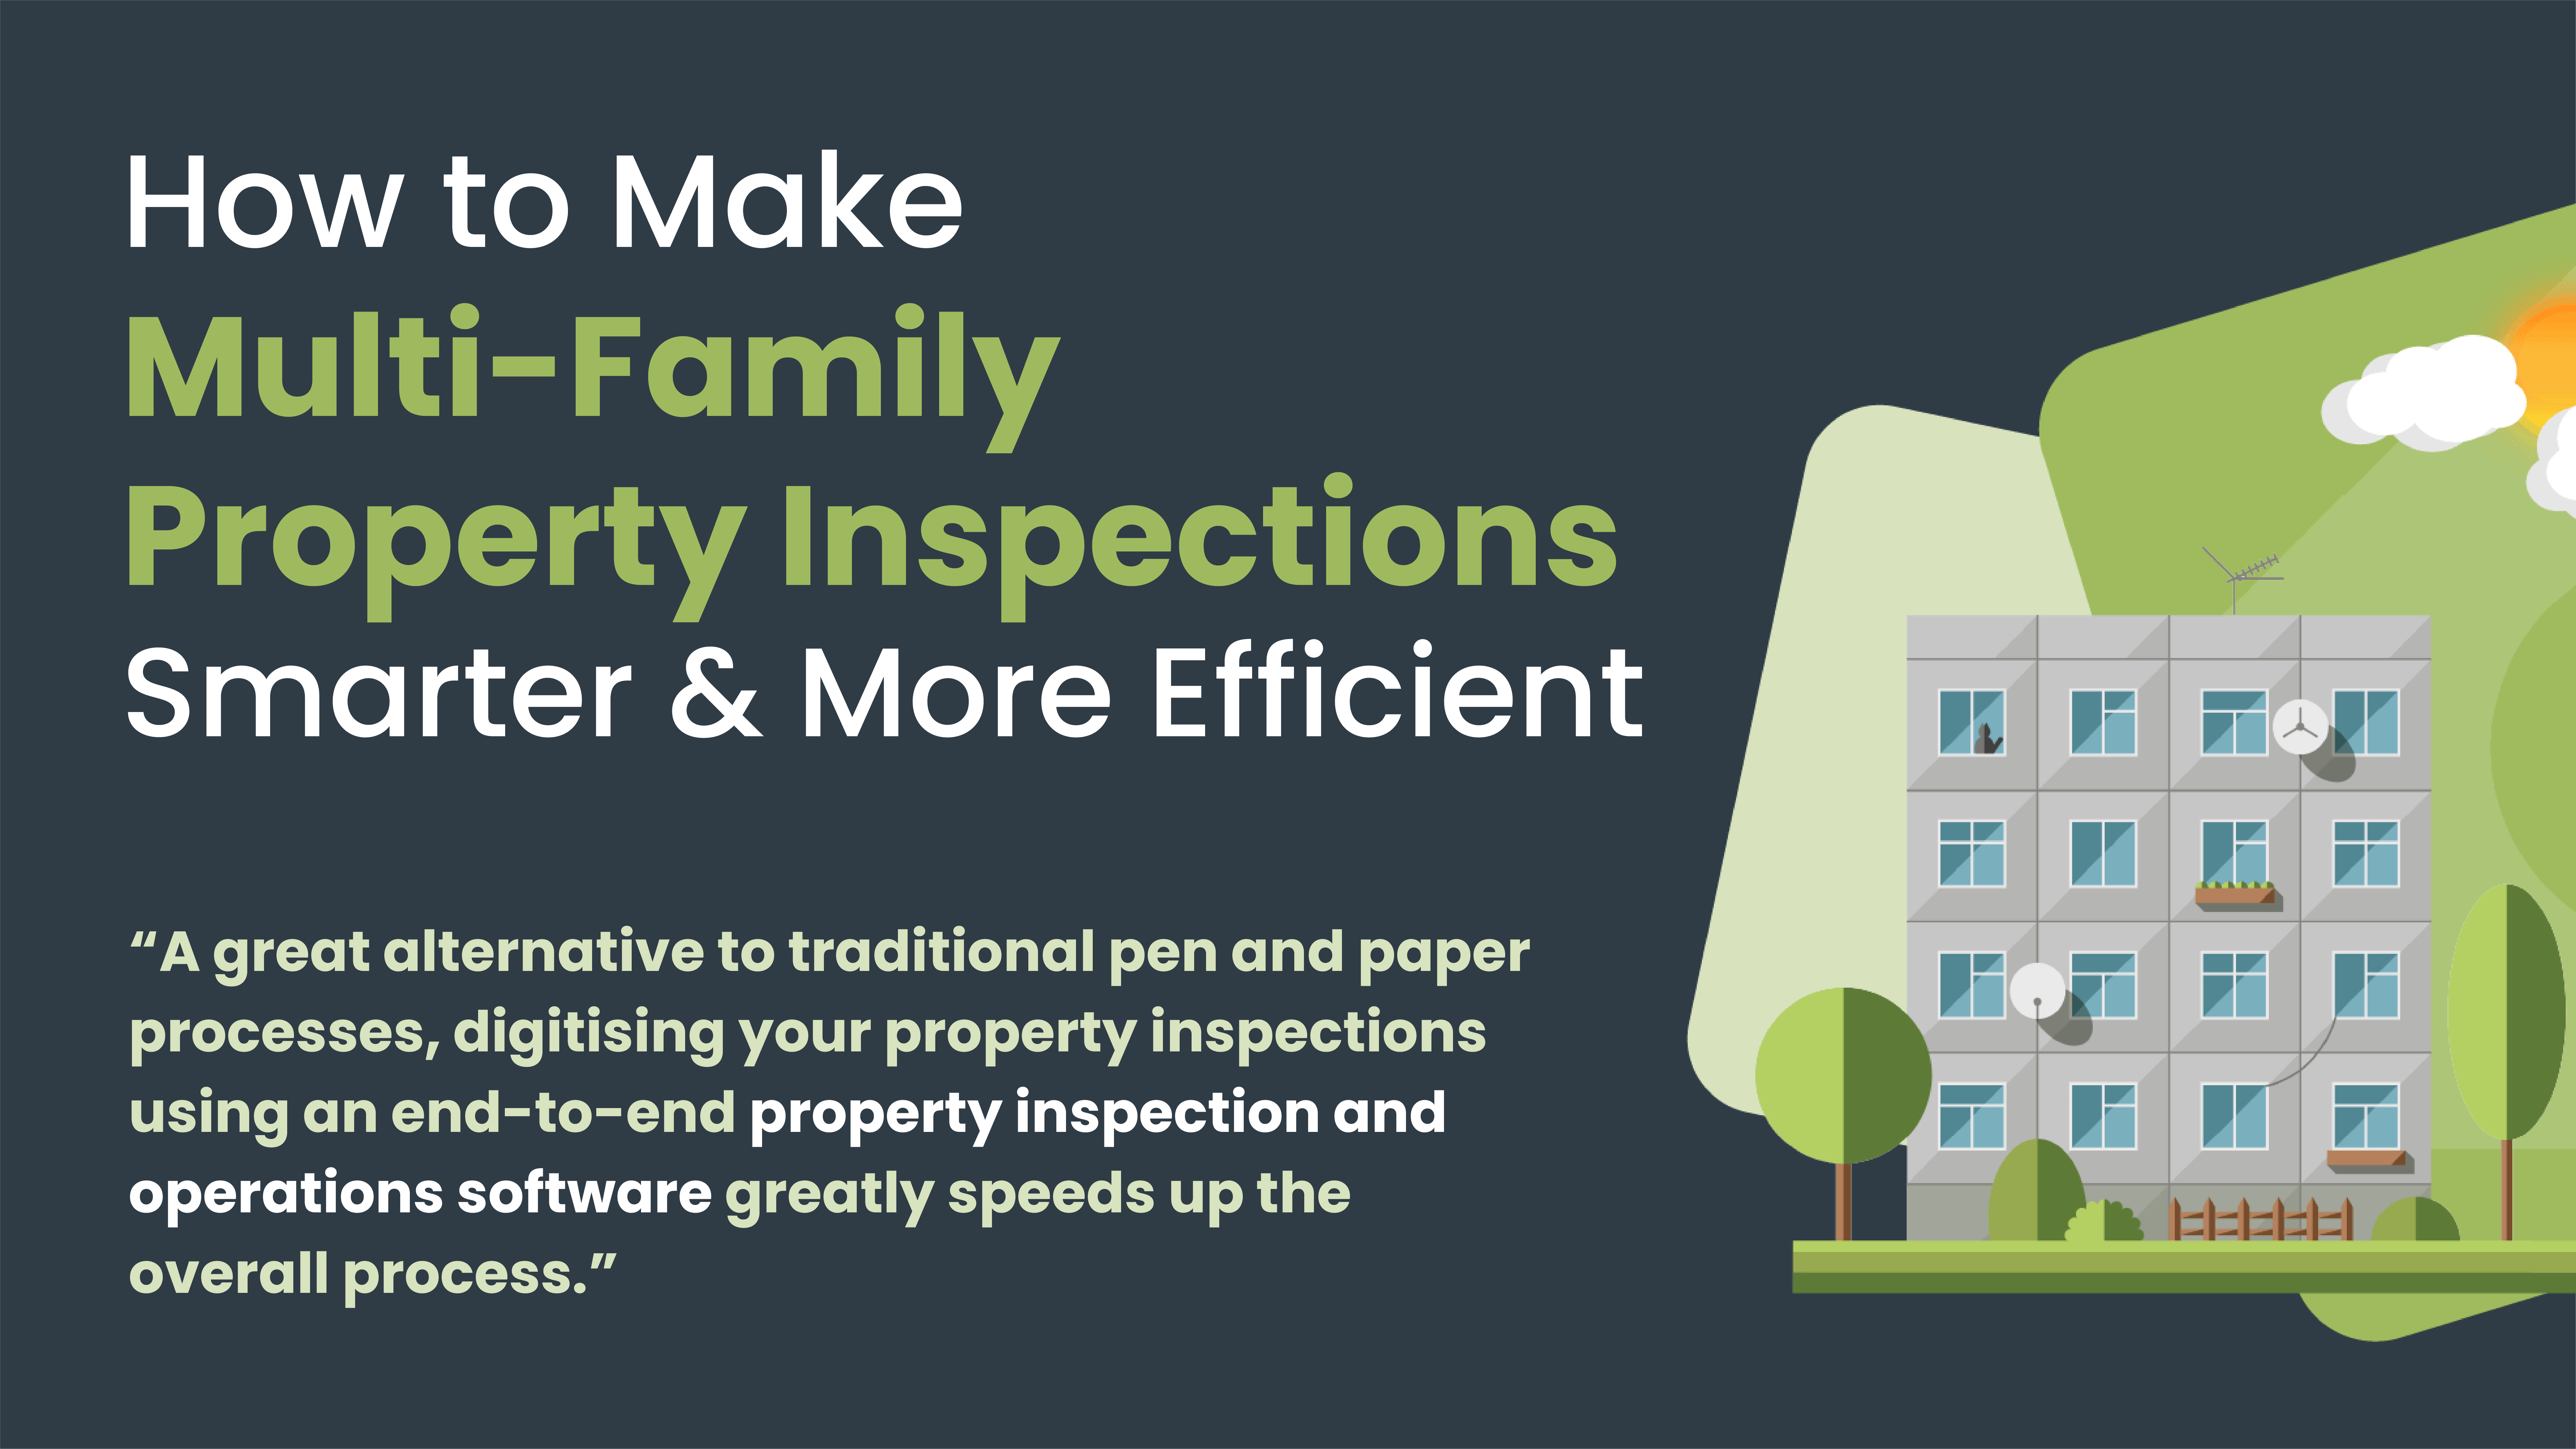 How to make multi-family property inspections smarter and more efficient